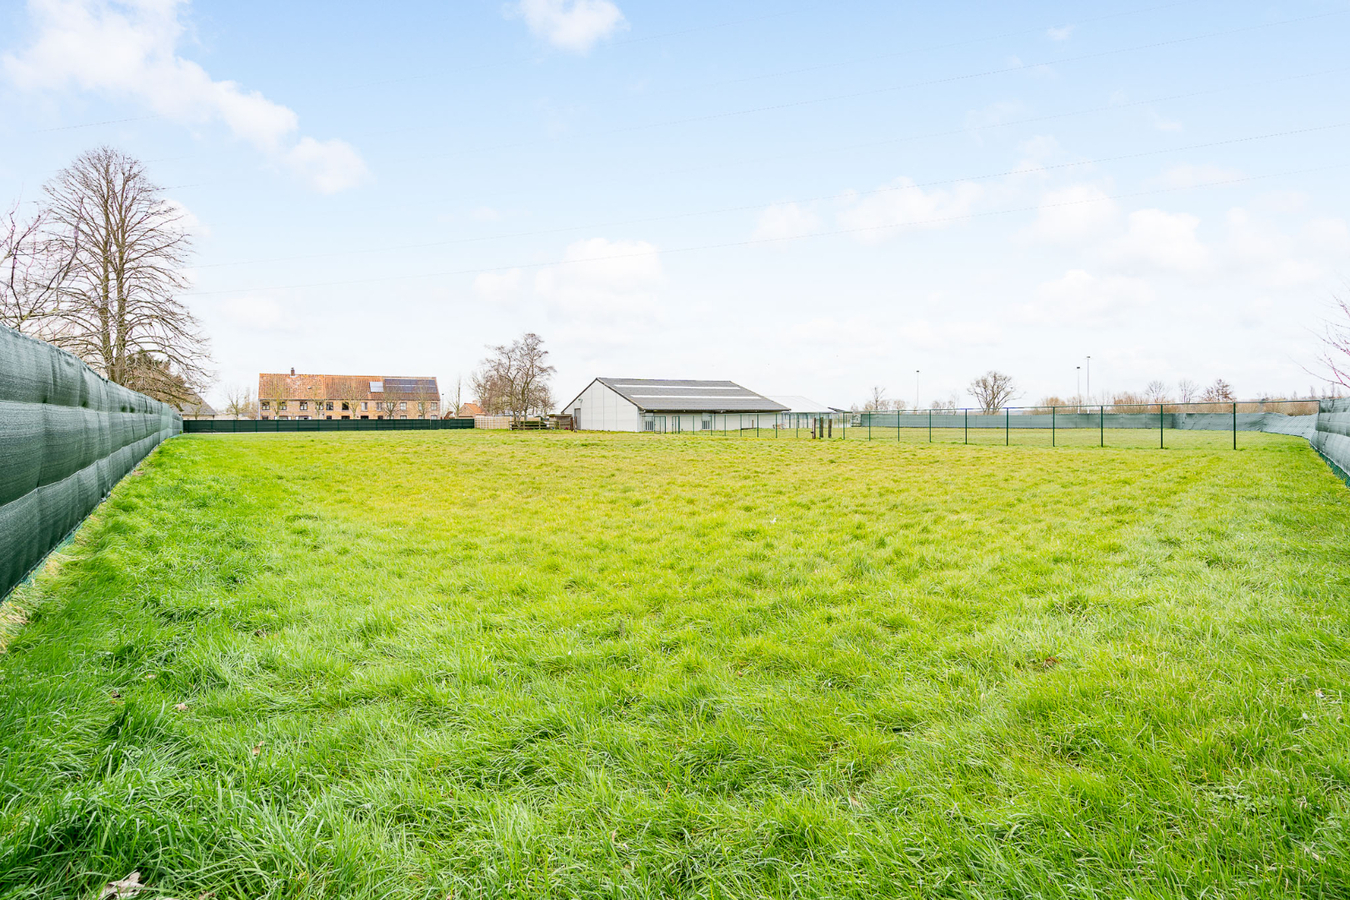 Property for sale |  with option - with restrictions in Zedelgem